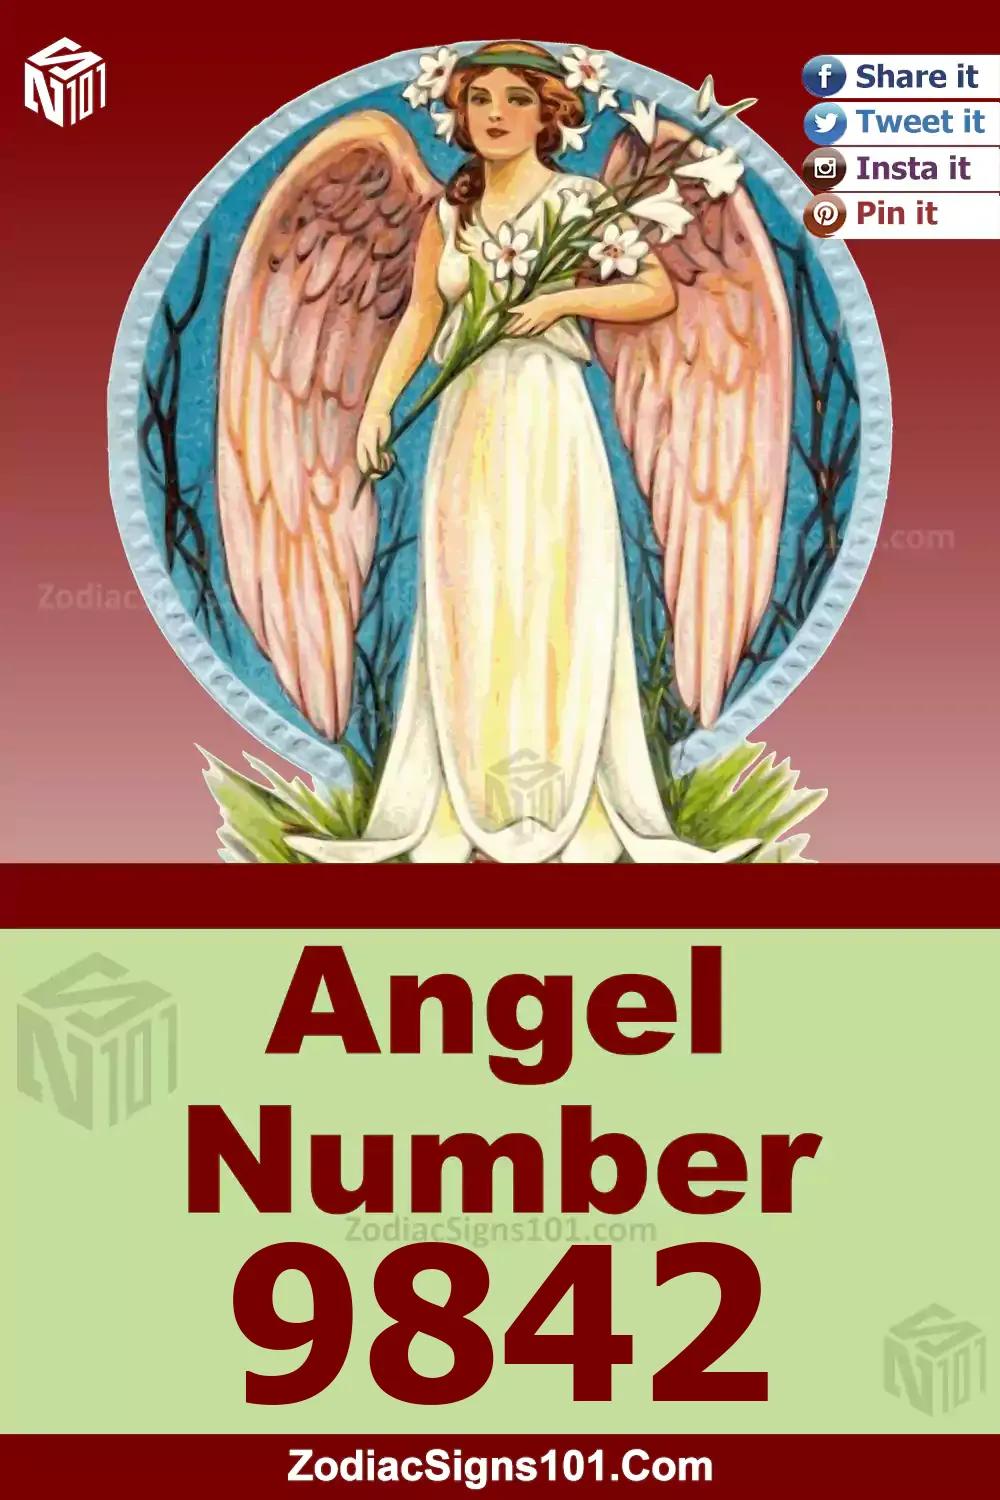 9842 Angel Number Meaning